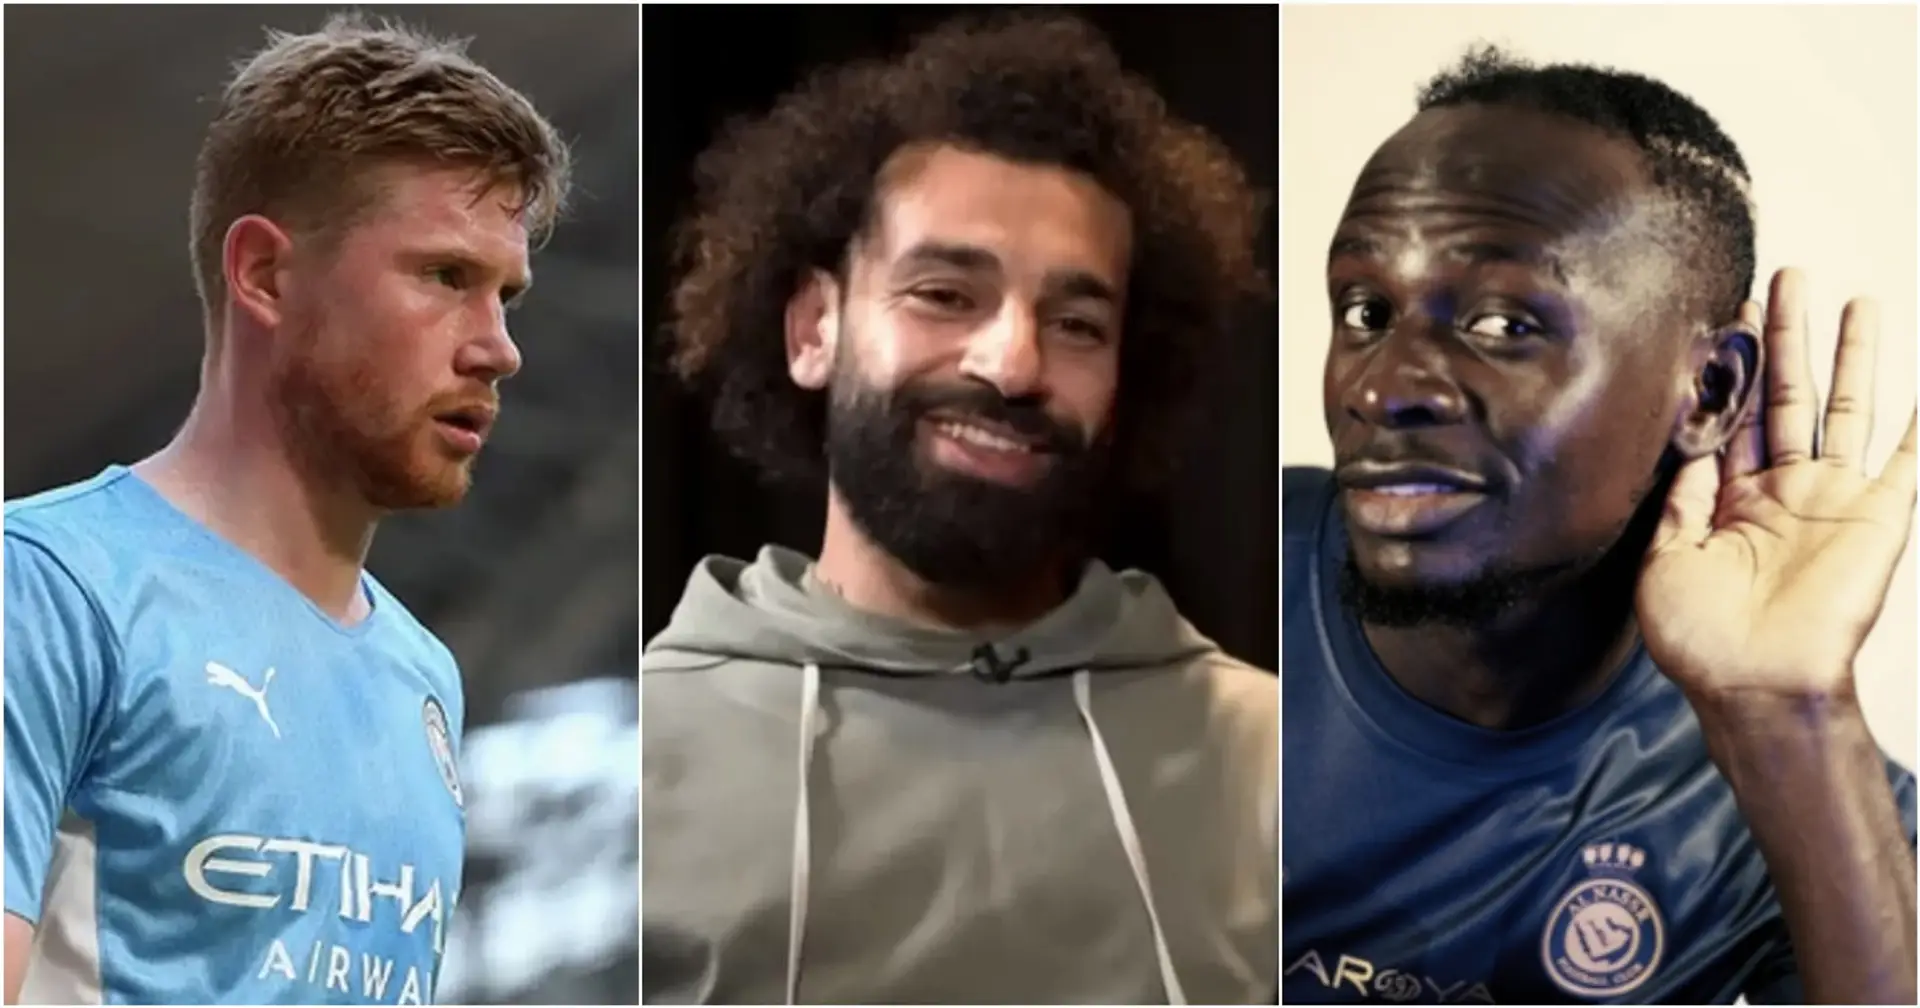 Salah names three players he'd love to play with - one of them is Mane's teammate